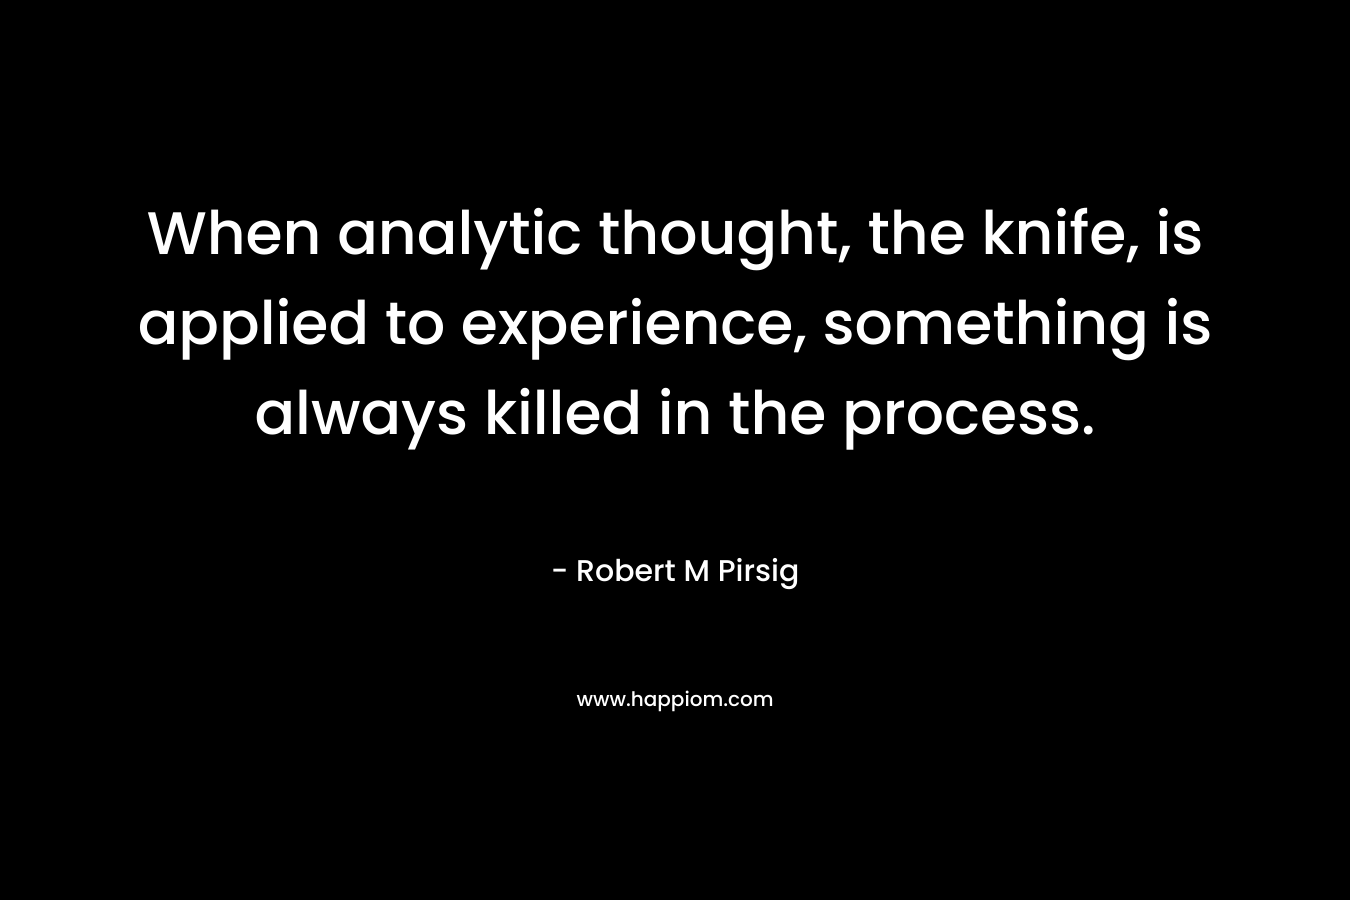 When analytic thought, the knife, is applied to experience, something is always killed in the process.